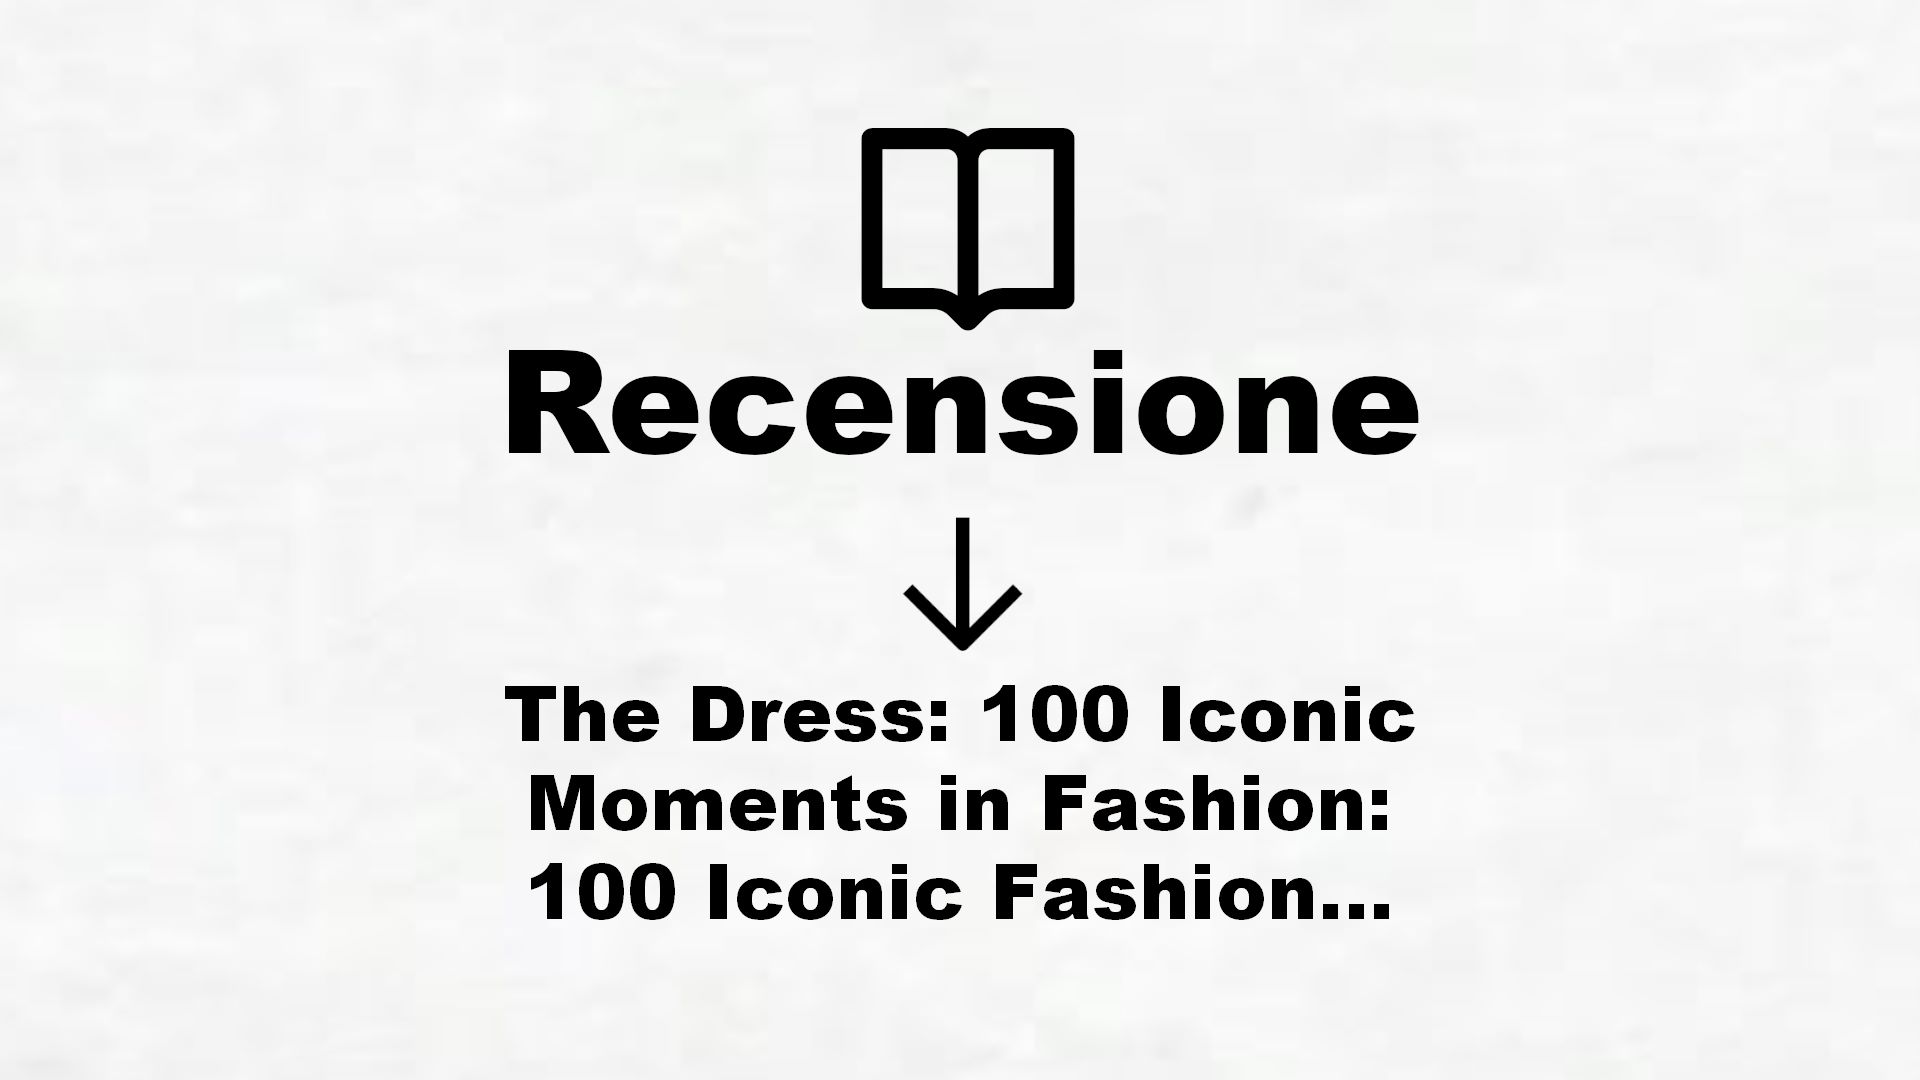 The Dress: 100 Iconic Moments in Fashion: 100 Iconic Fashion Moments – Recensione Libro